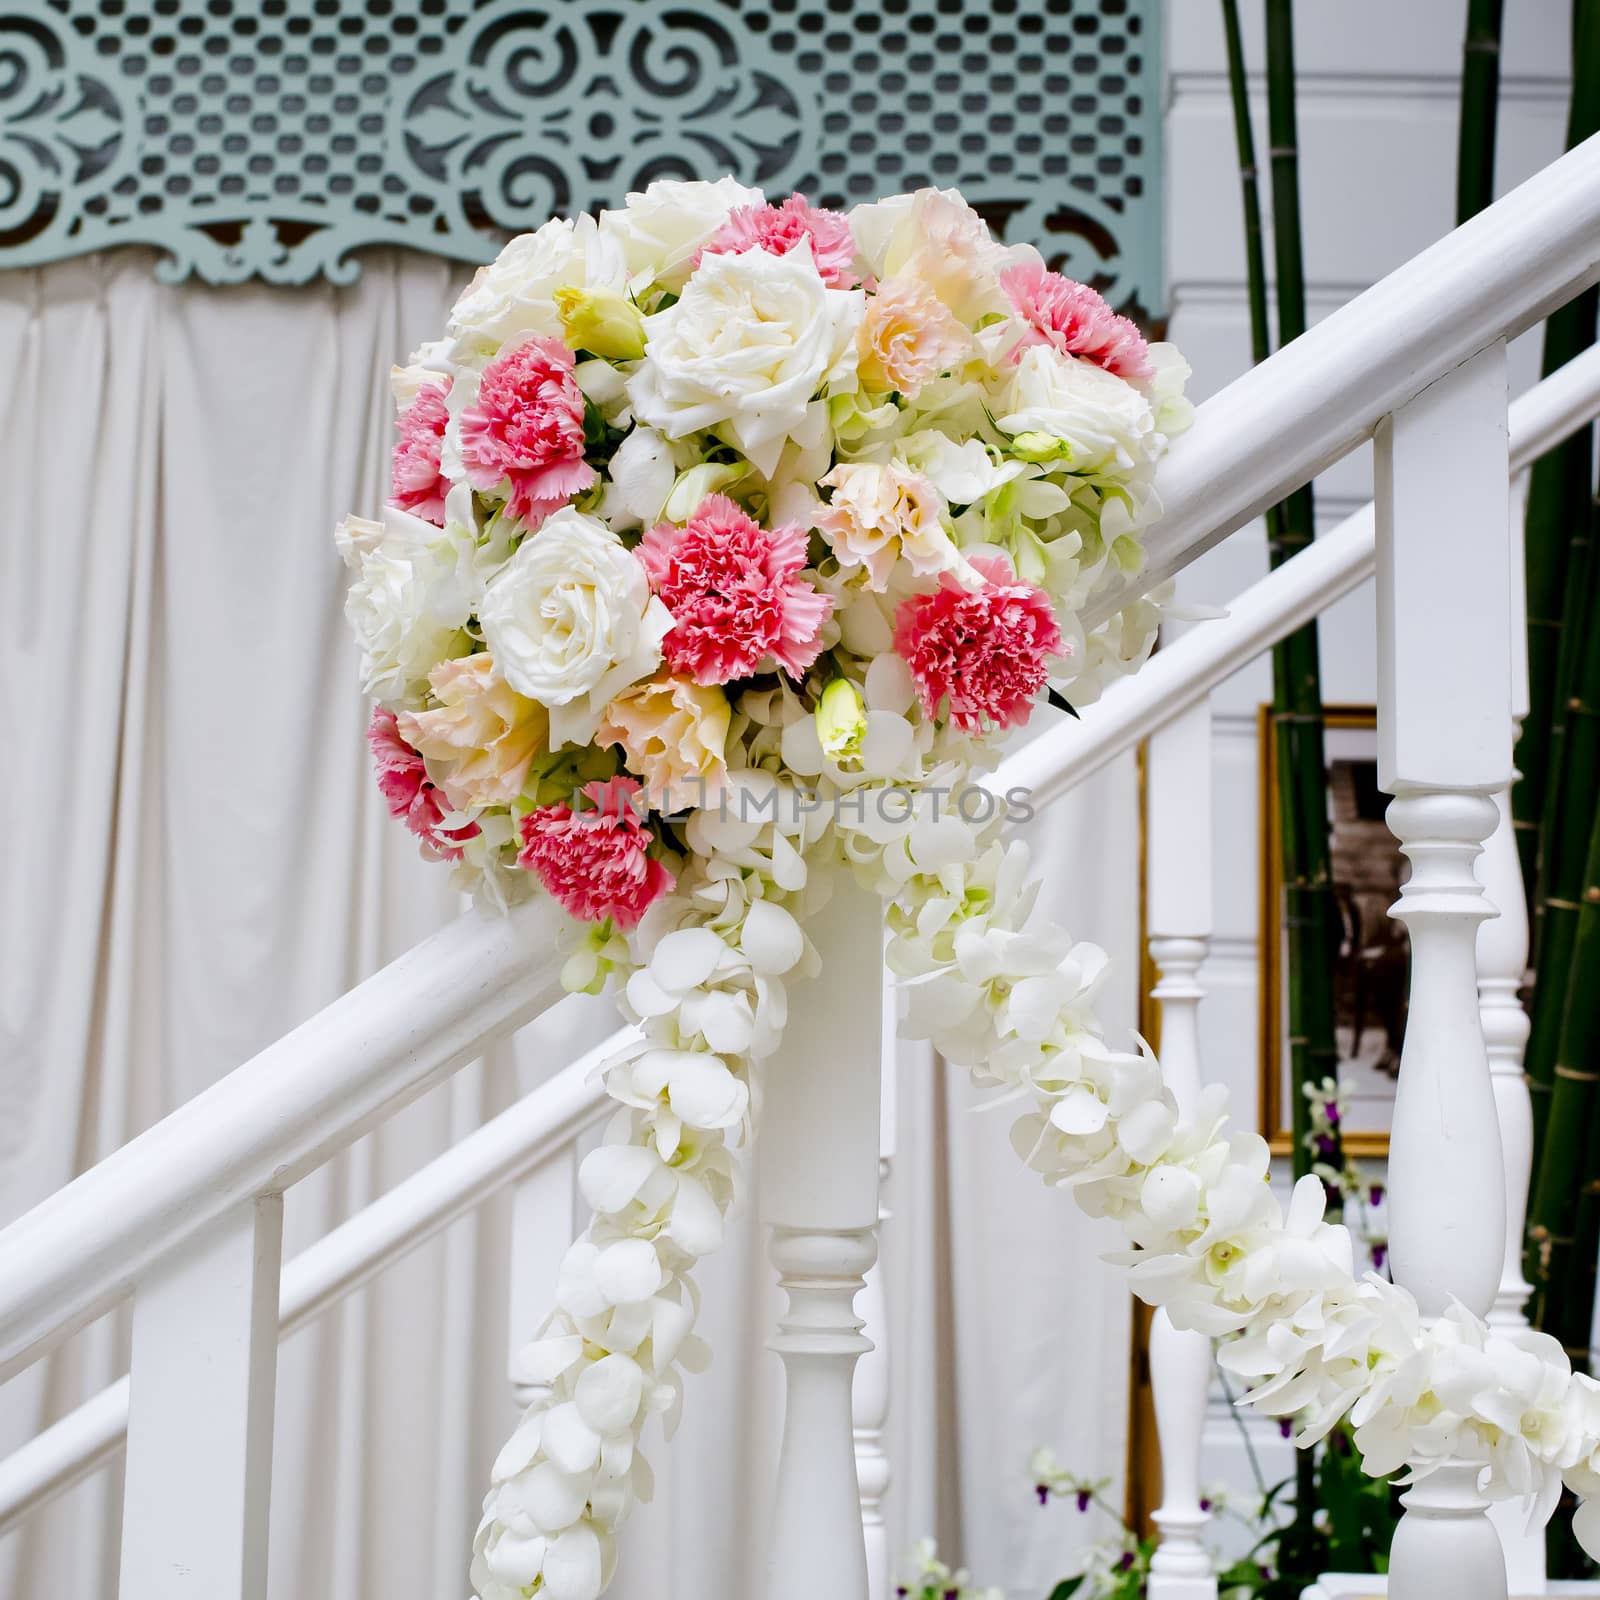 Beautiful wedding flower decoration at stairs by art9858